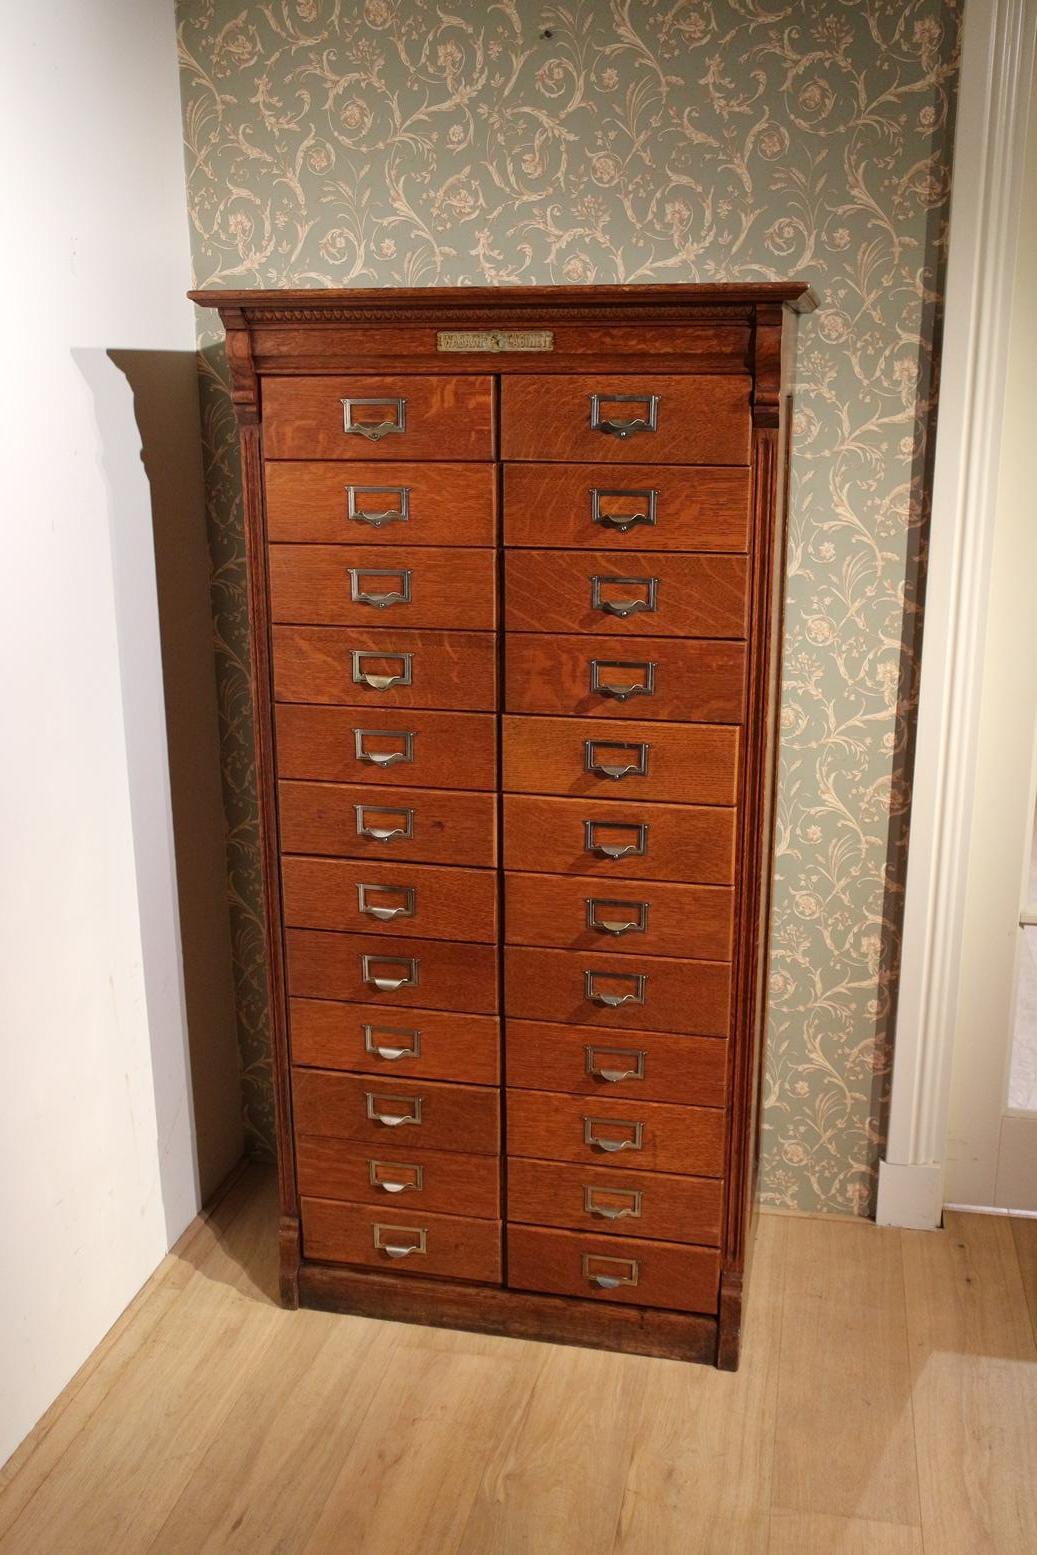 Antique oak filing cabinet with 24 filing drawers  from the American firm Wabash Cabinet Company. Entirely in very good and usable condition. The drawers still have the original labels and storage systems. Drawers are made in such a way that they